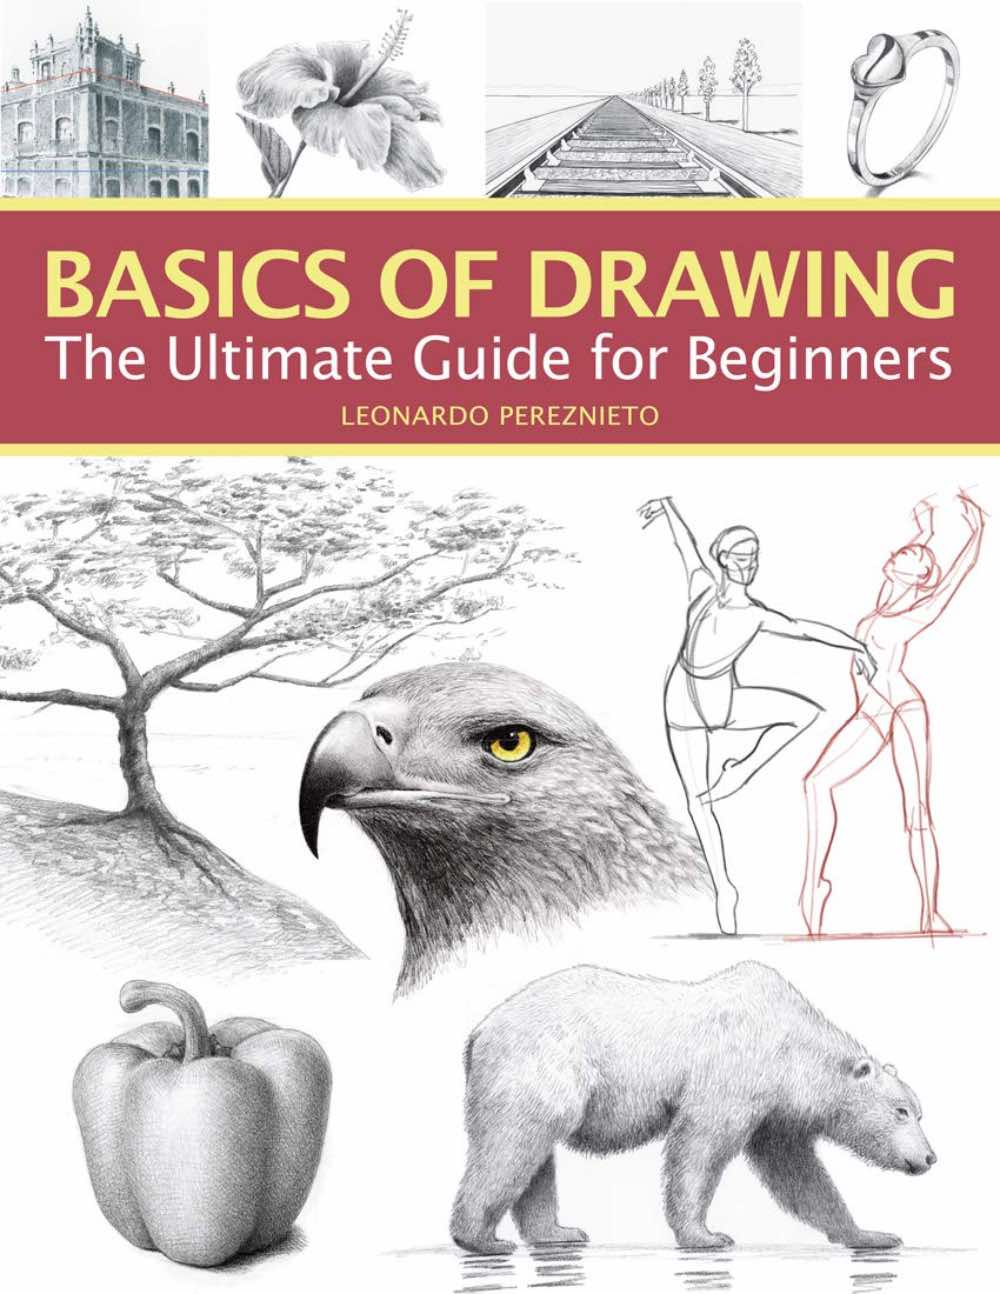 This book by Leonardo Pereznieto will help you build basic skills like proportions and perspective.